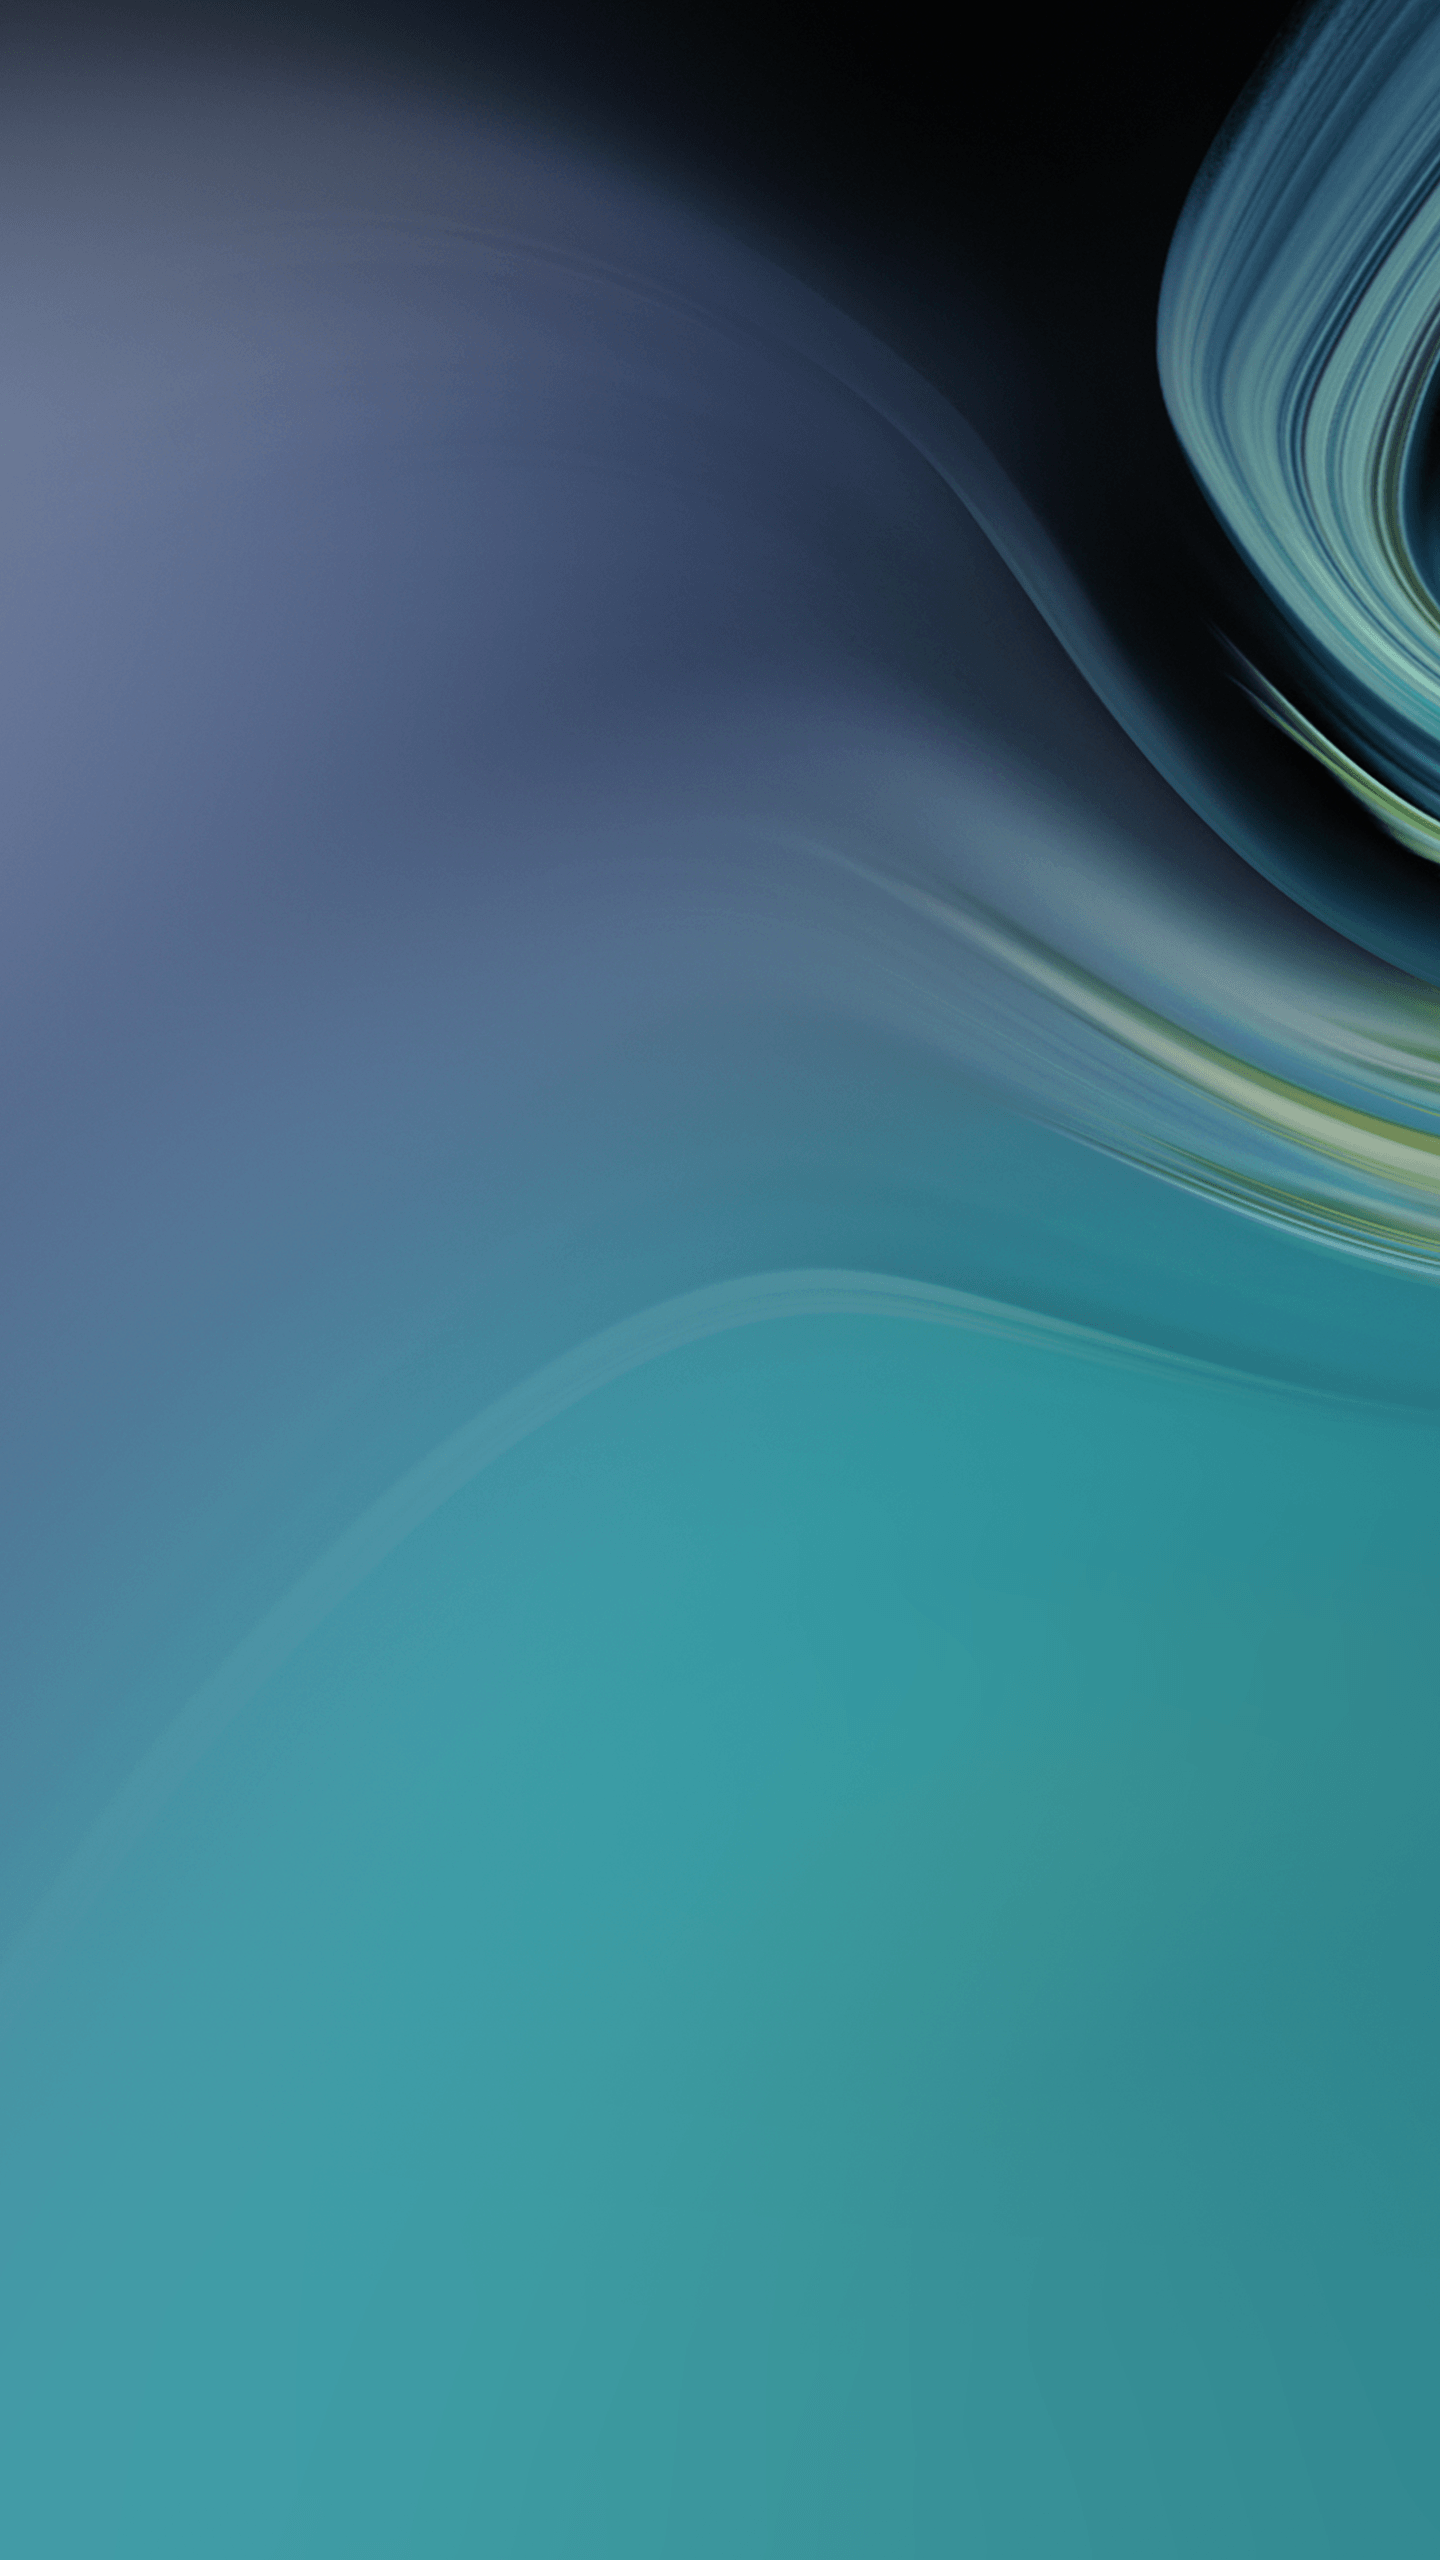 Wallpapers Waves, Gradient, Teal, Turquoise, Samsung Galaxy Tab S